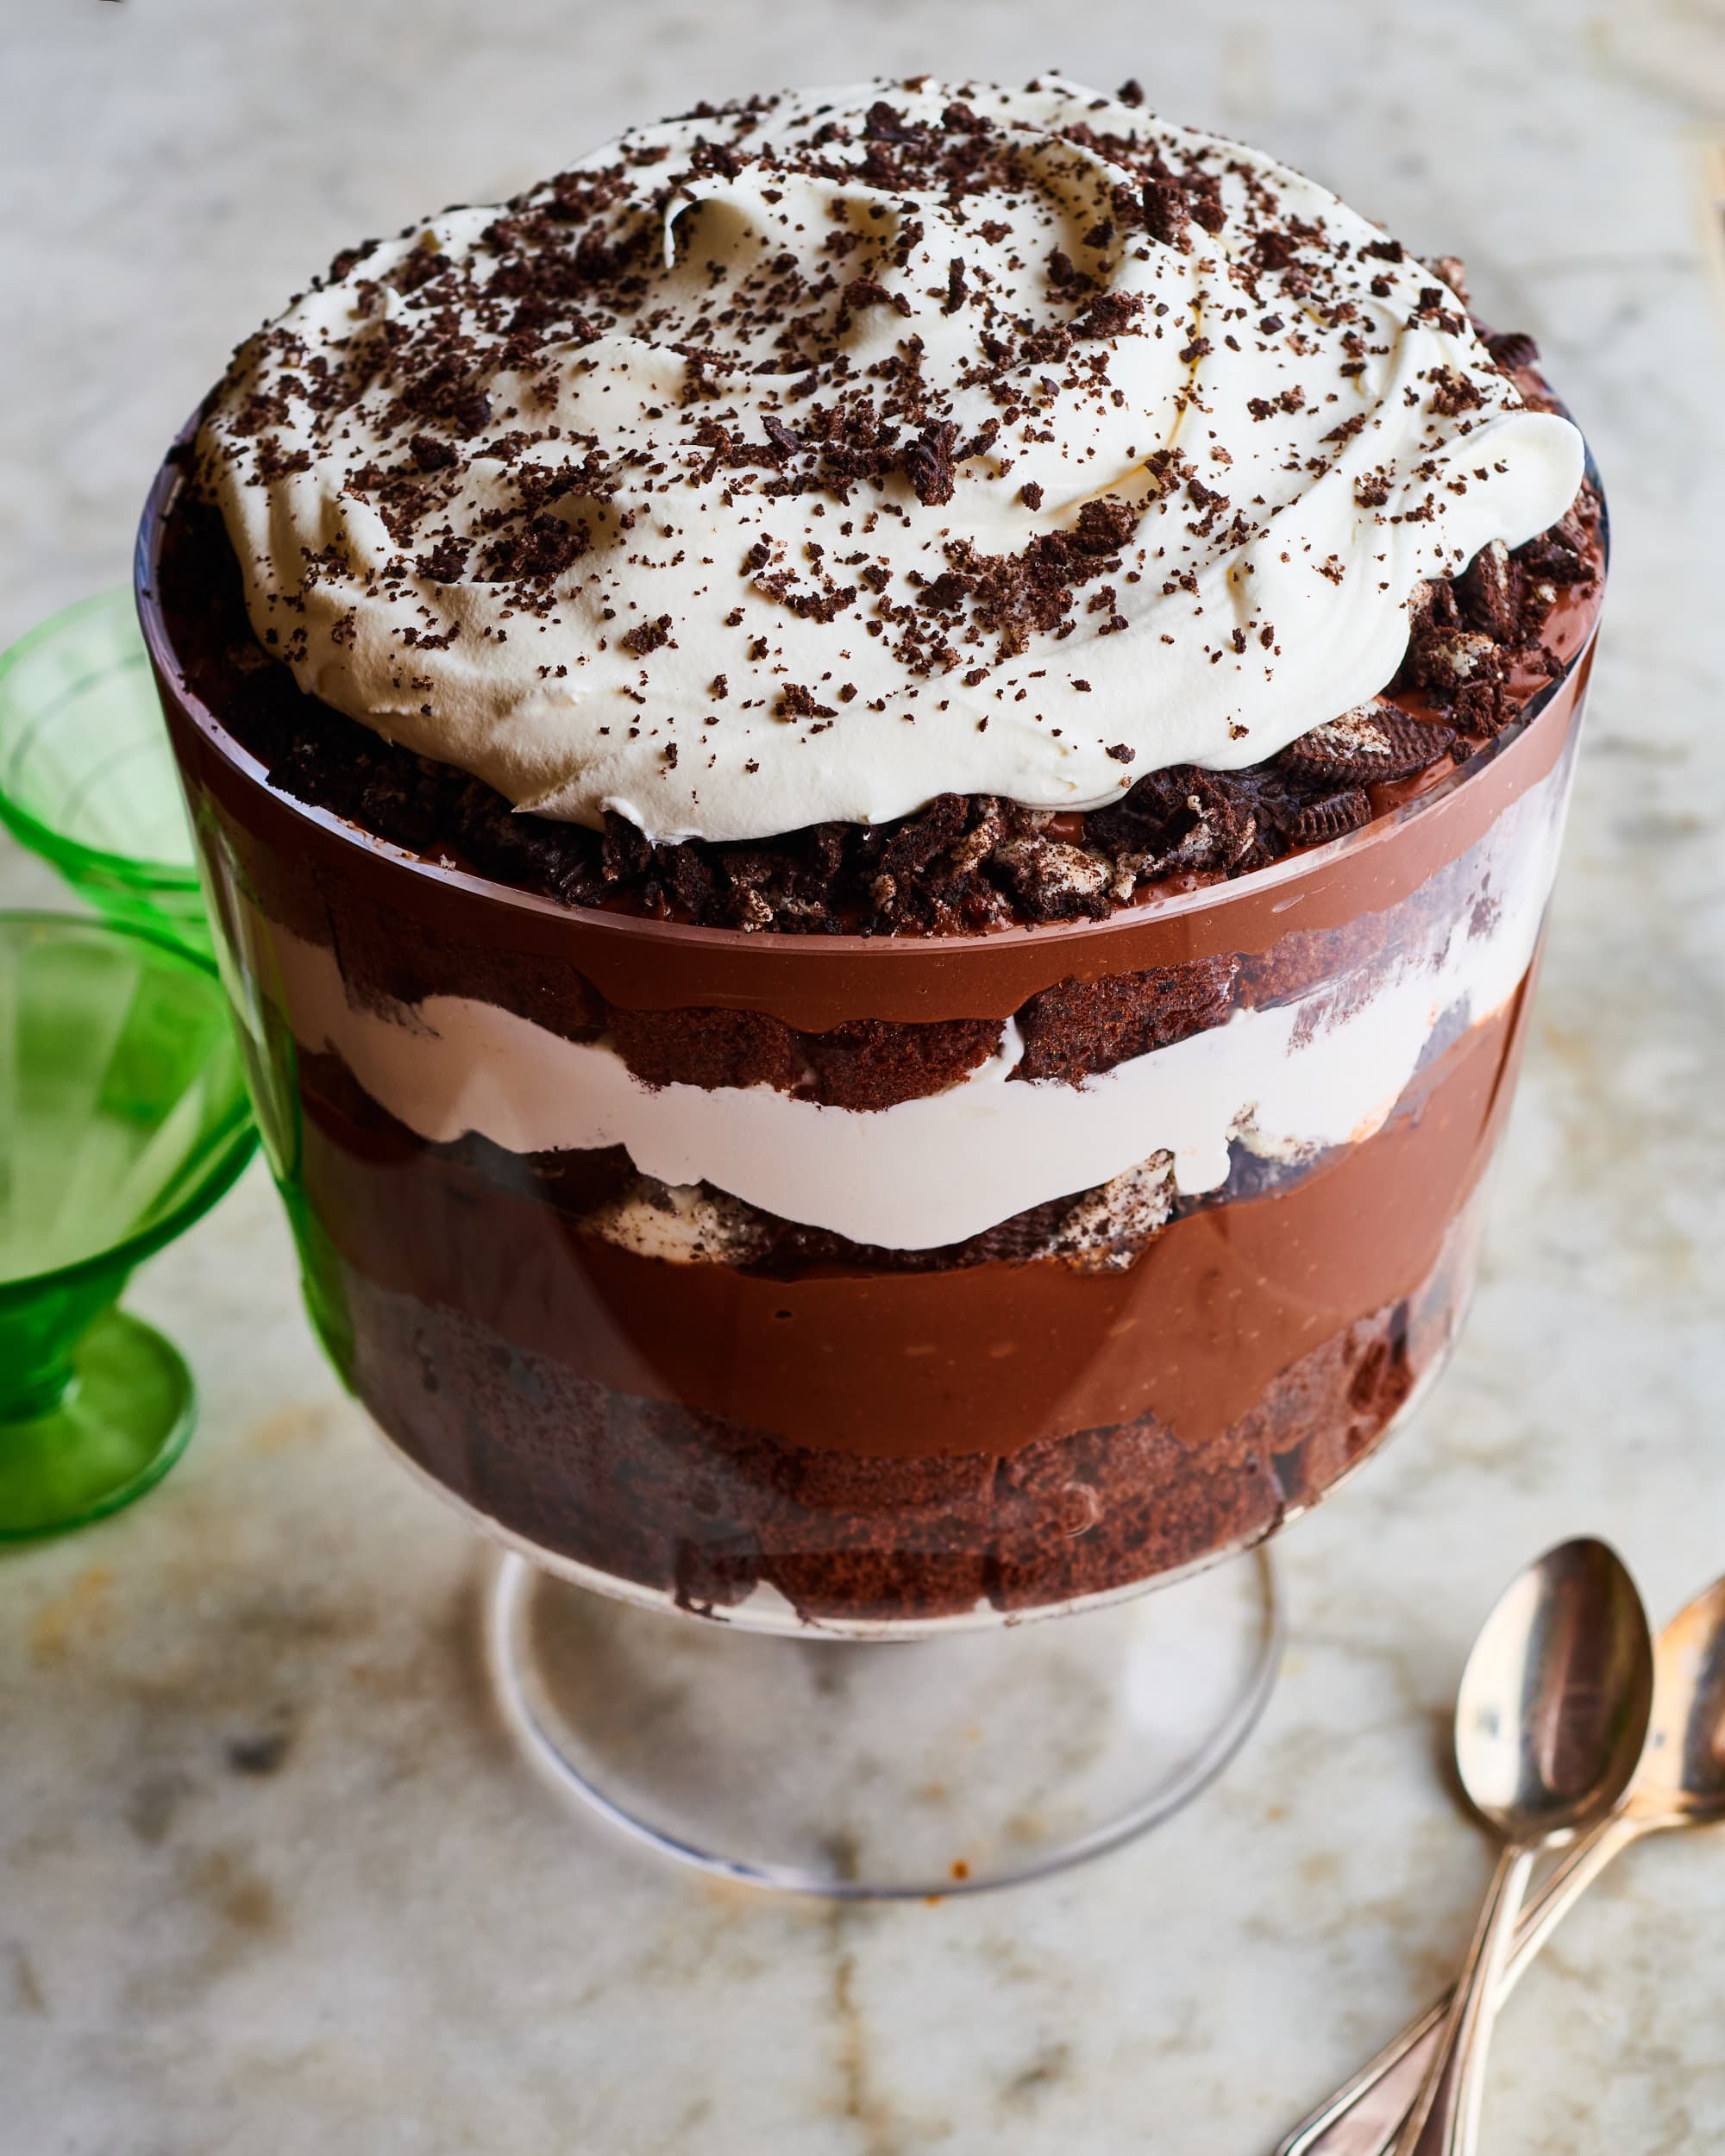 Easy Chocolate Trifle Recipe The Kitchn image